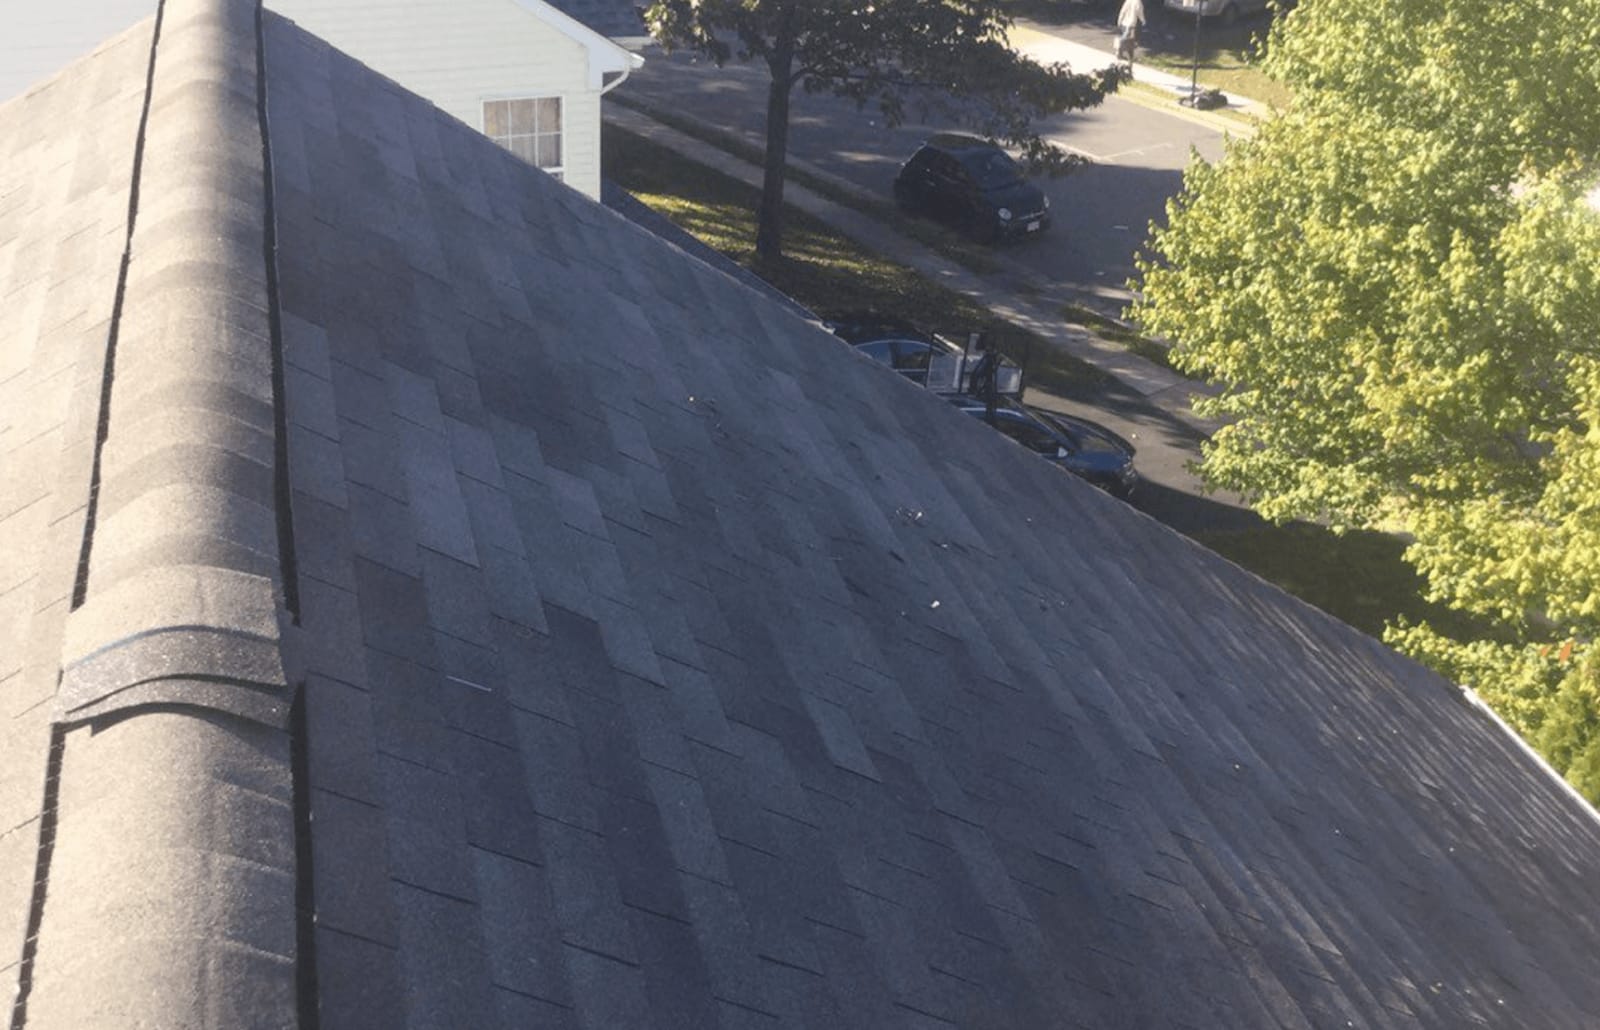 Roofsimple installing new roofing system for Teri Baltimore